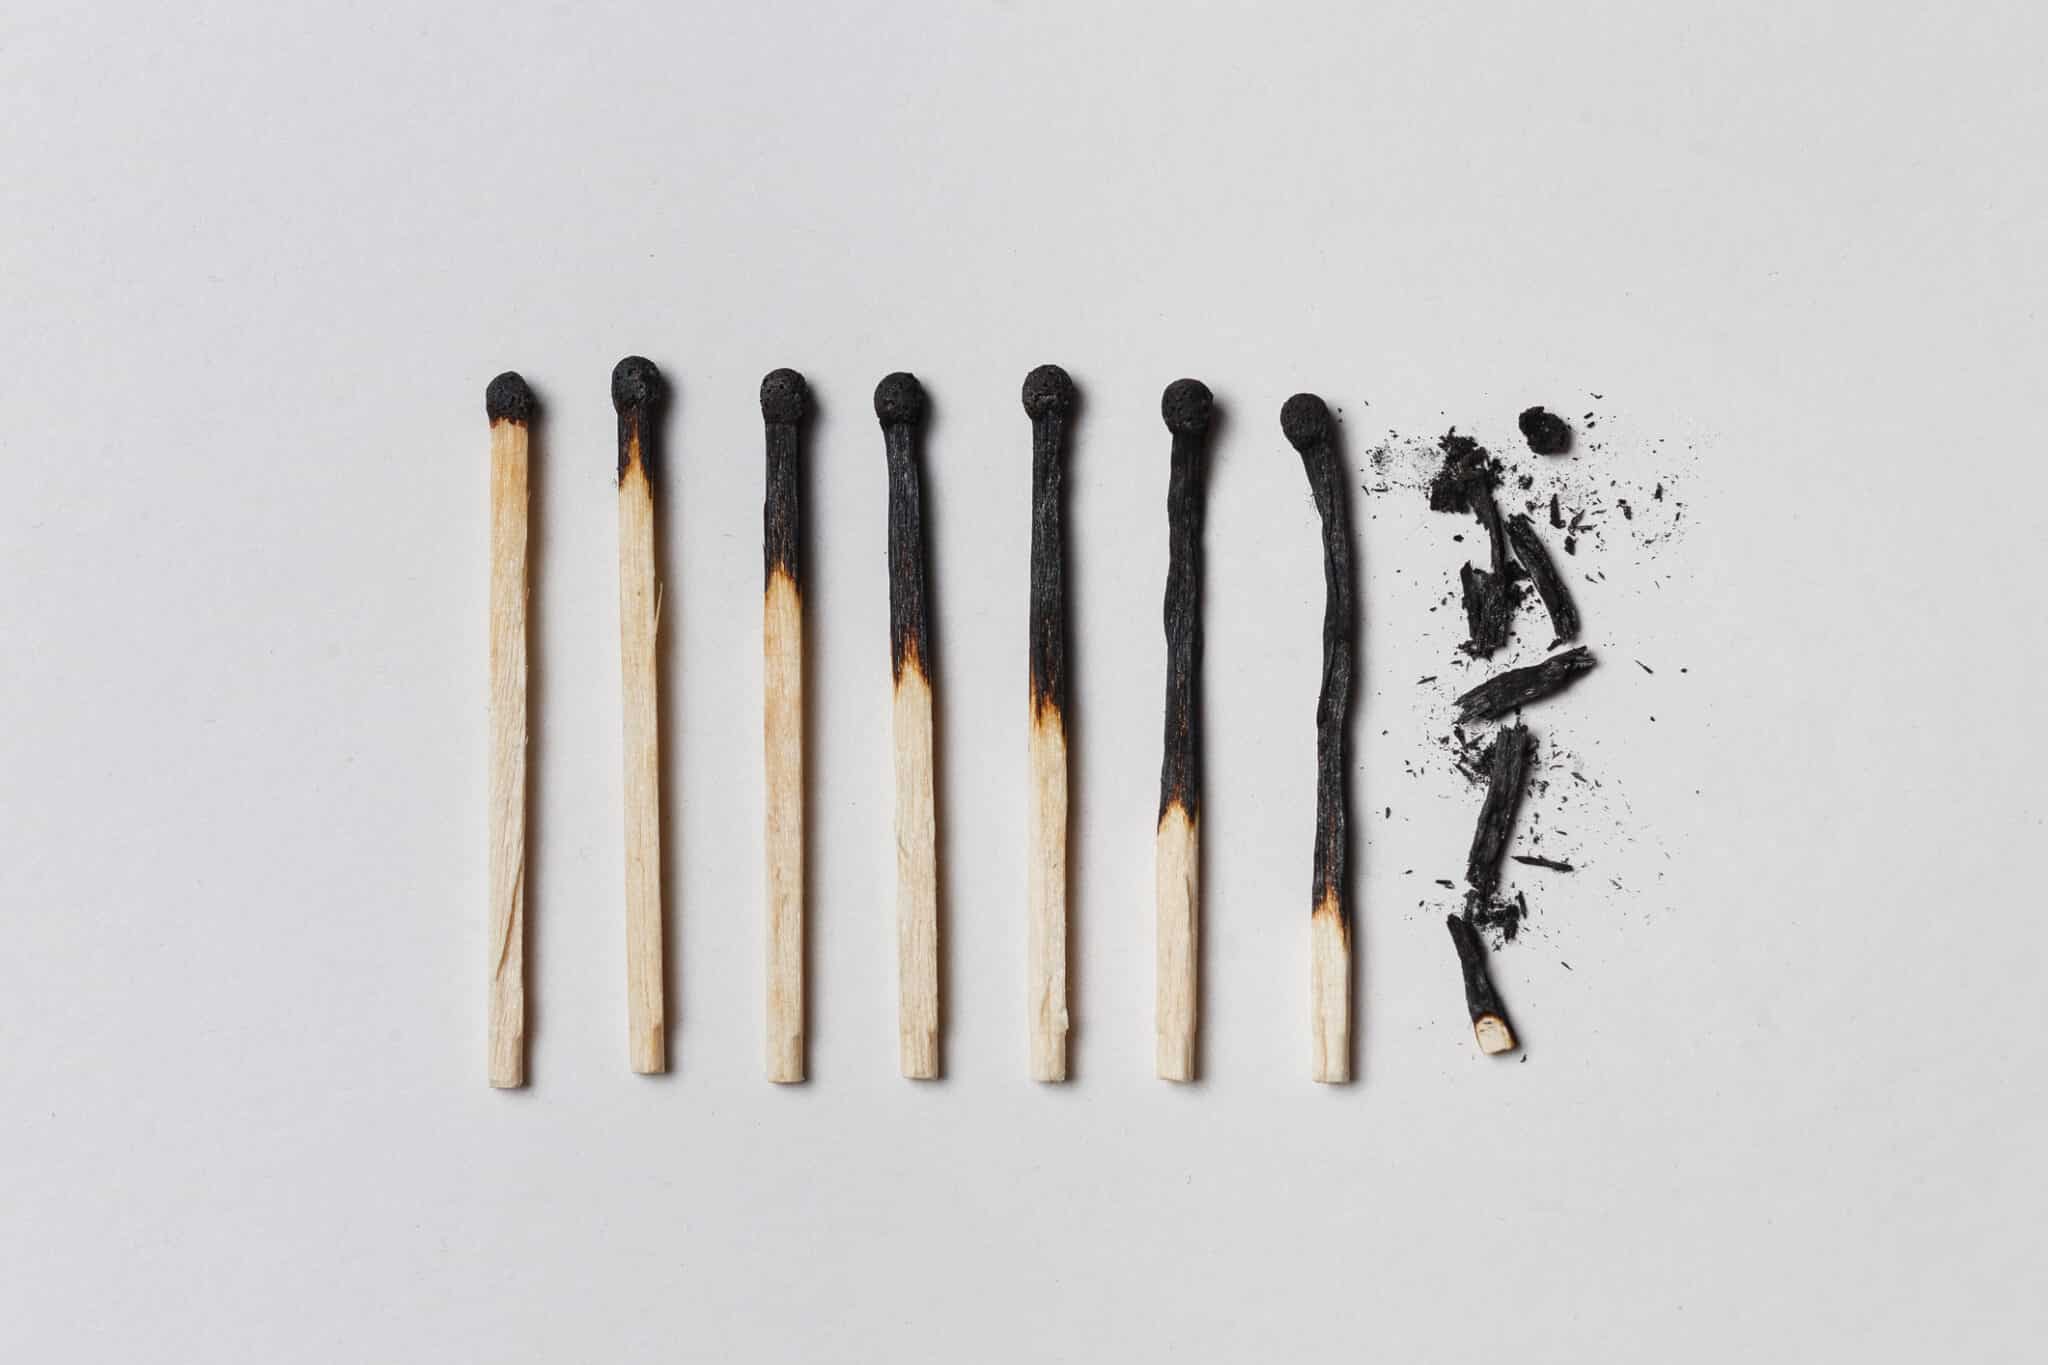 Charred matches, each one burn a little more than the last.